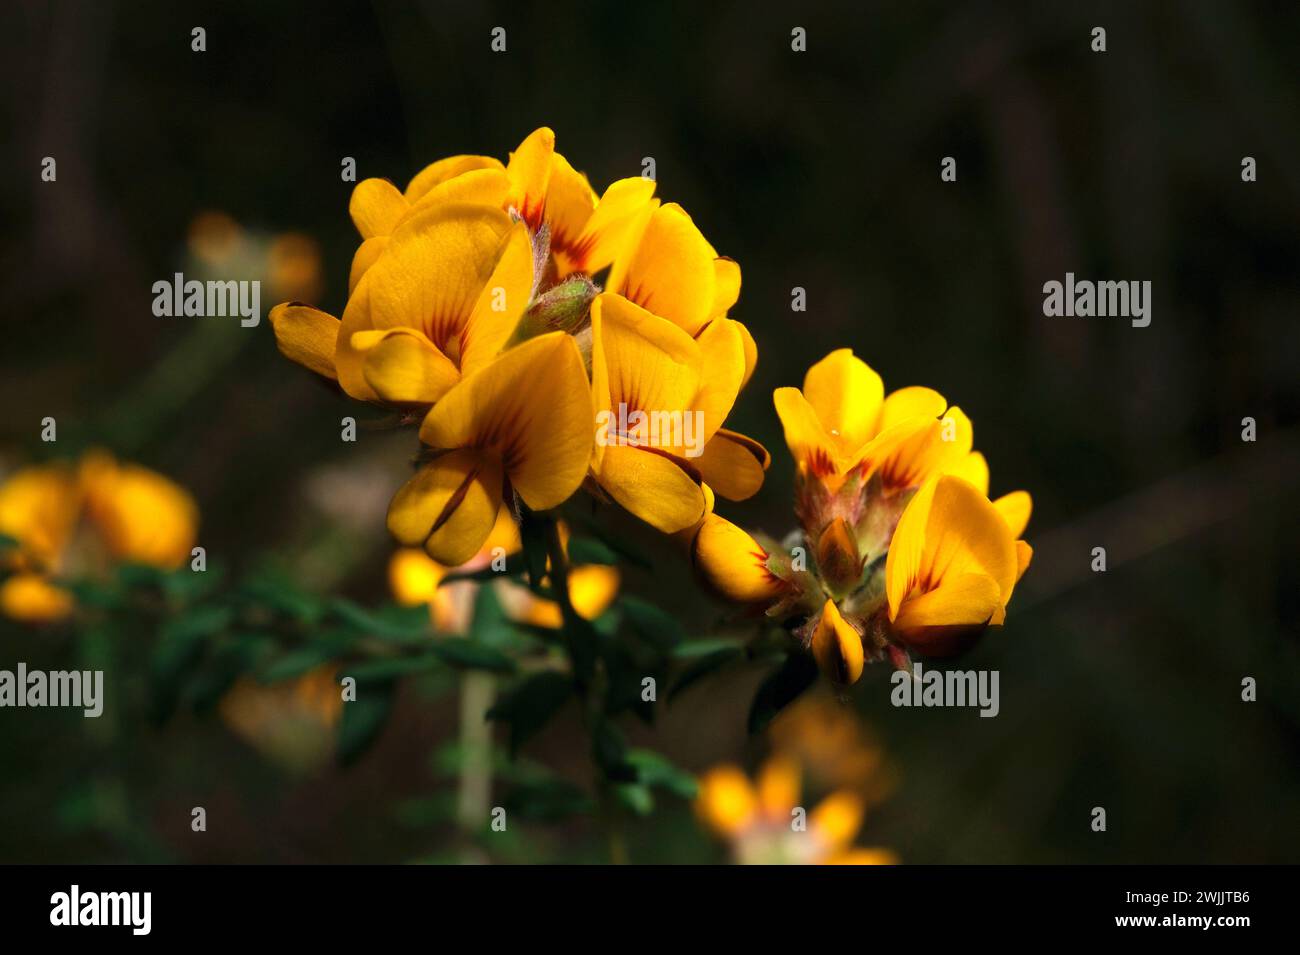 Eggs And Bacon (Aotus Ericoides) get their name from the colour of the flowers - you wouldn't want to try eating them! Early Spring flowering shrub.. Stock Photo